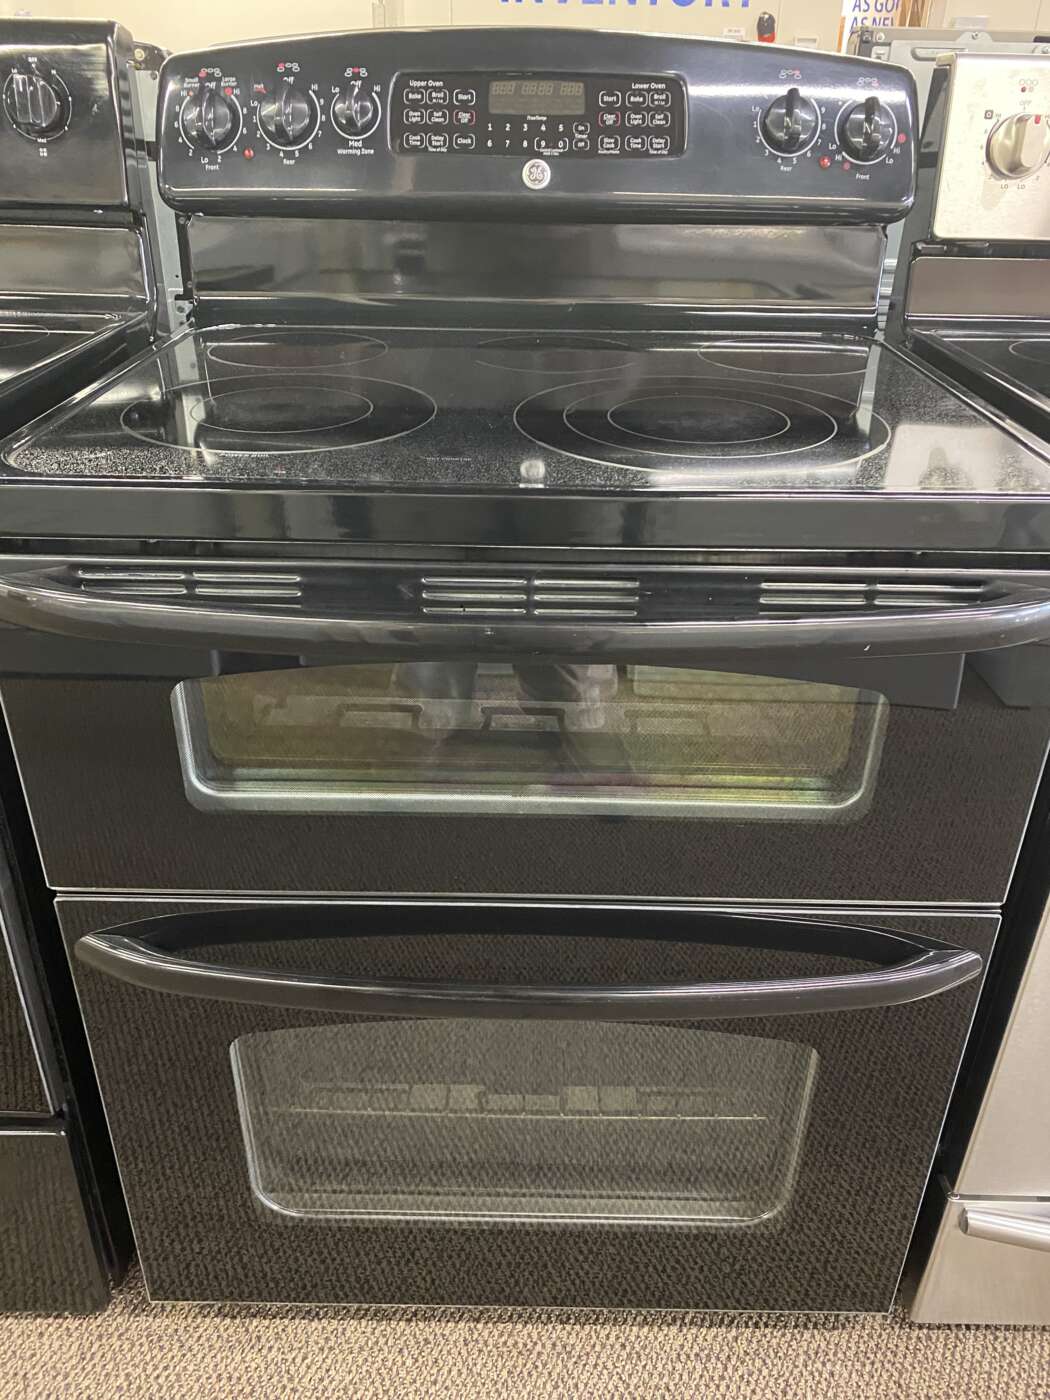 Reconditioned G/E Self-Clean Double-Oven Electric Range – Black